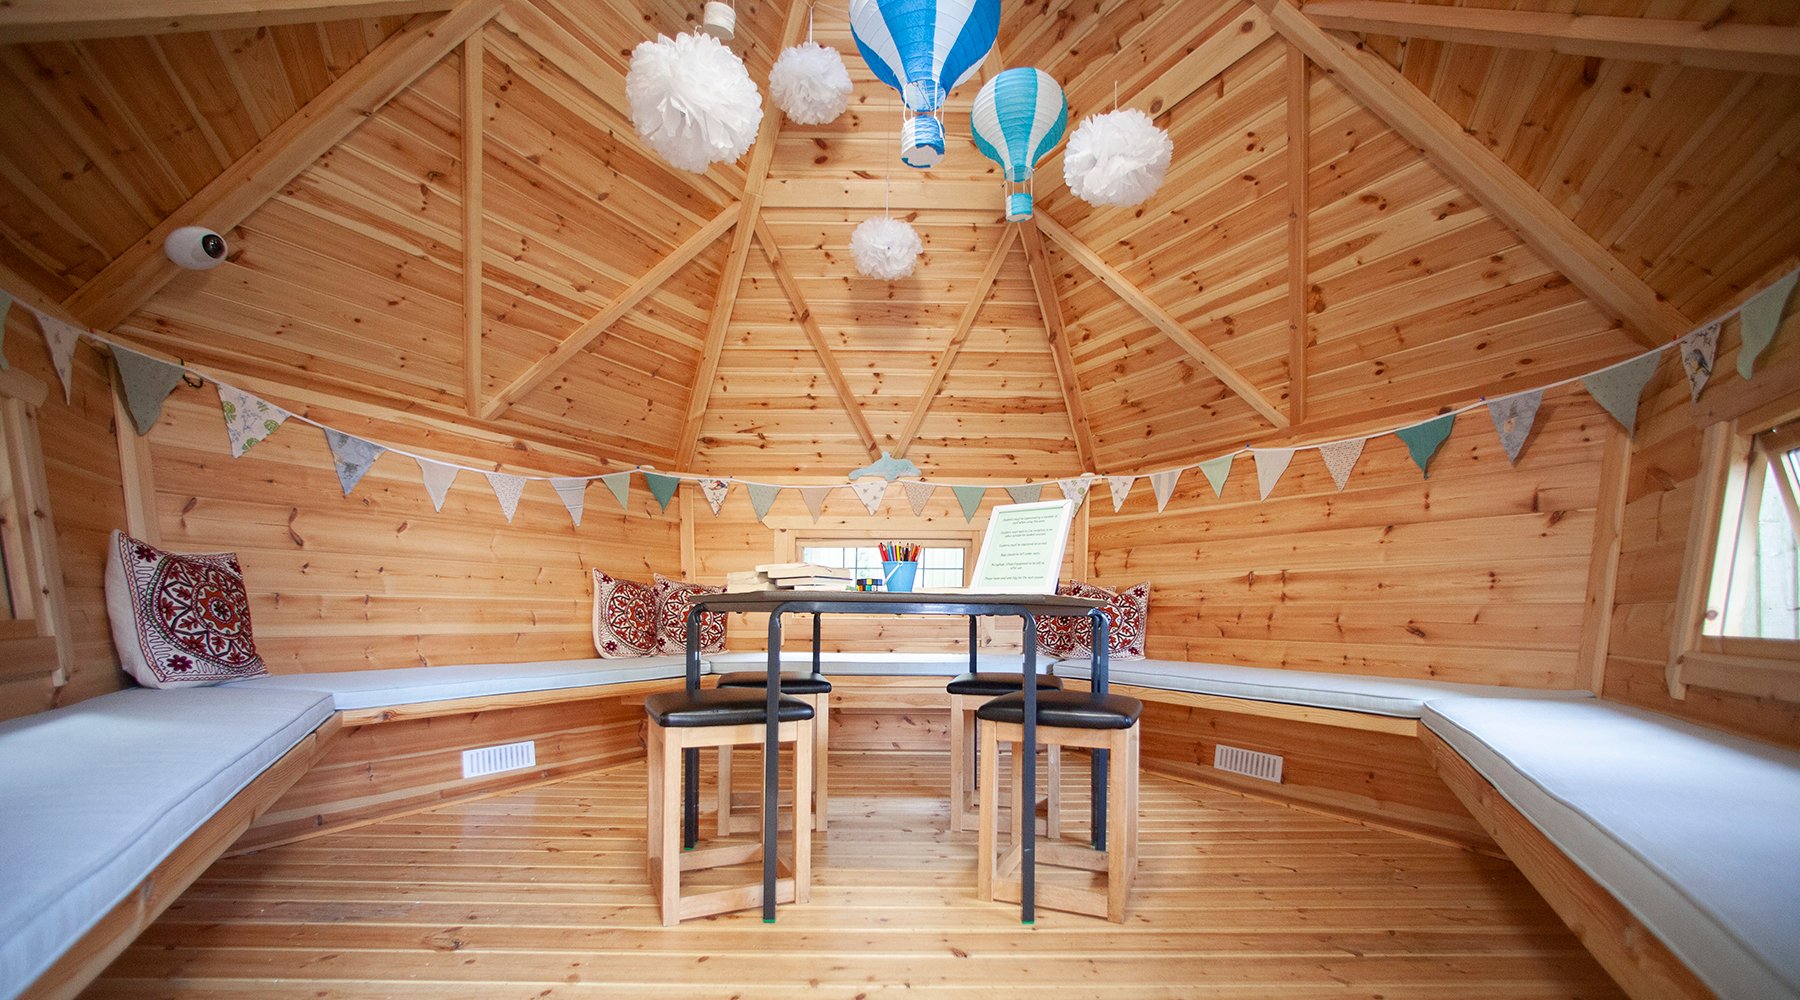 Interior of a timber forest school cabin with decor and desk